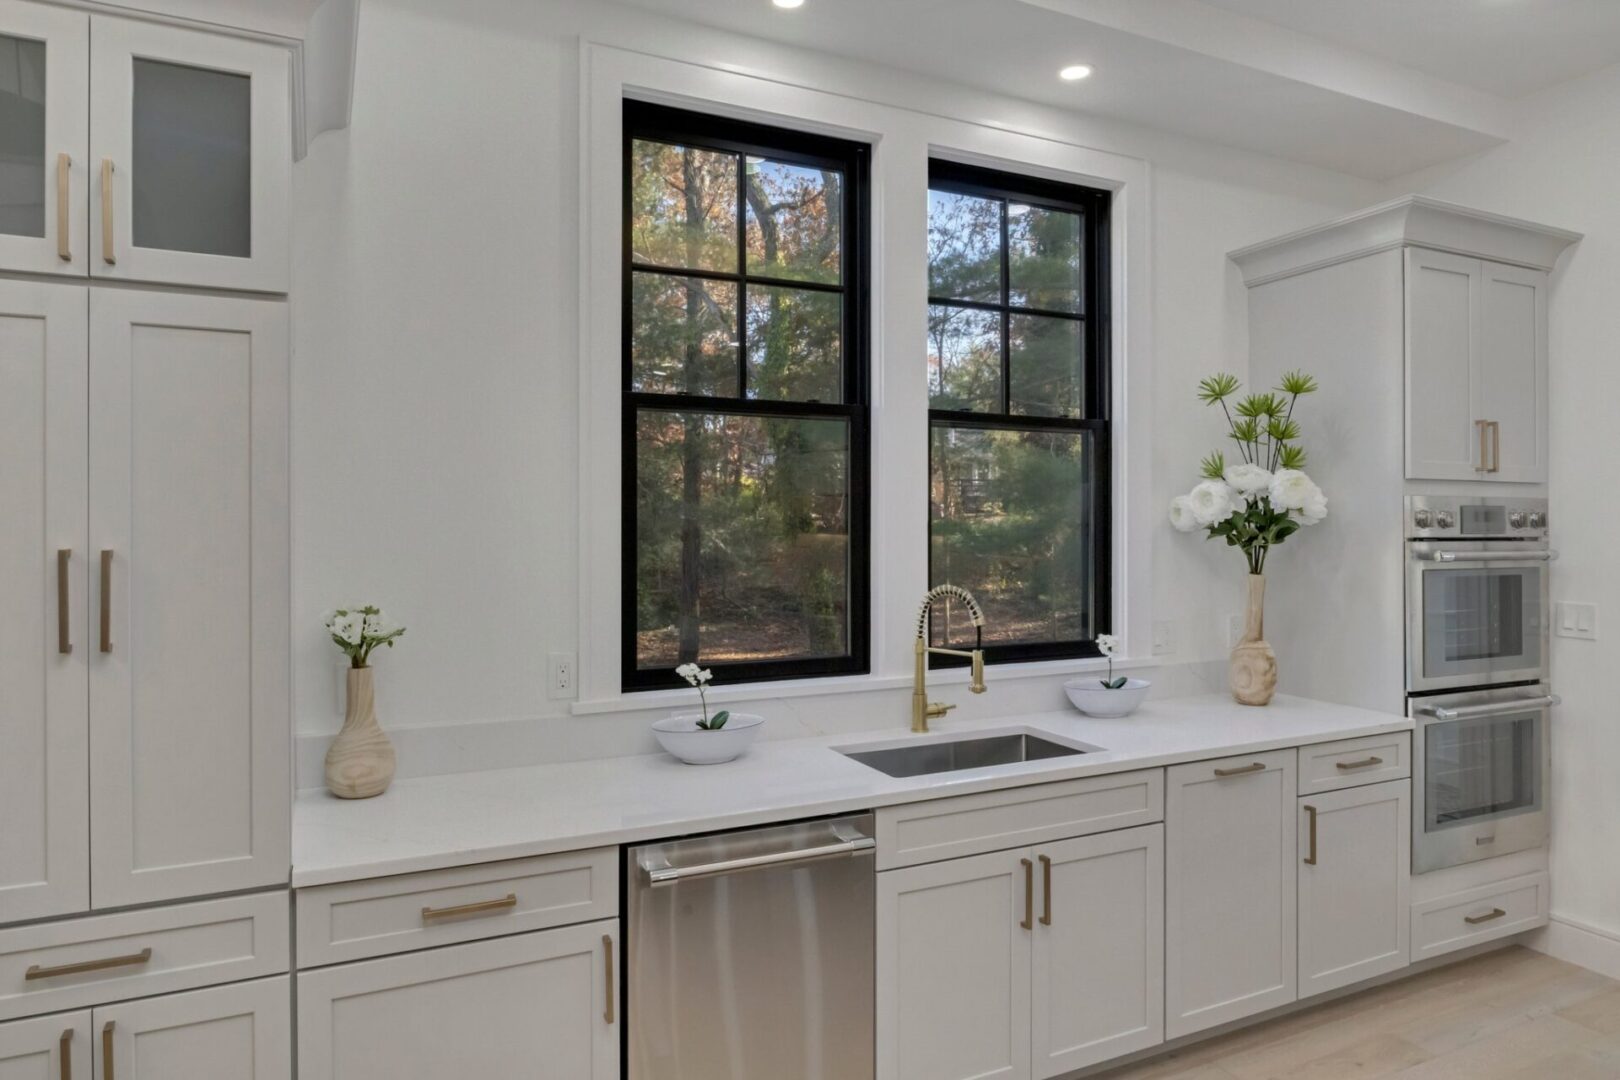 A kitchen with white cabinets and black windows.